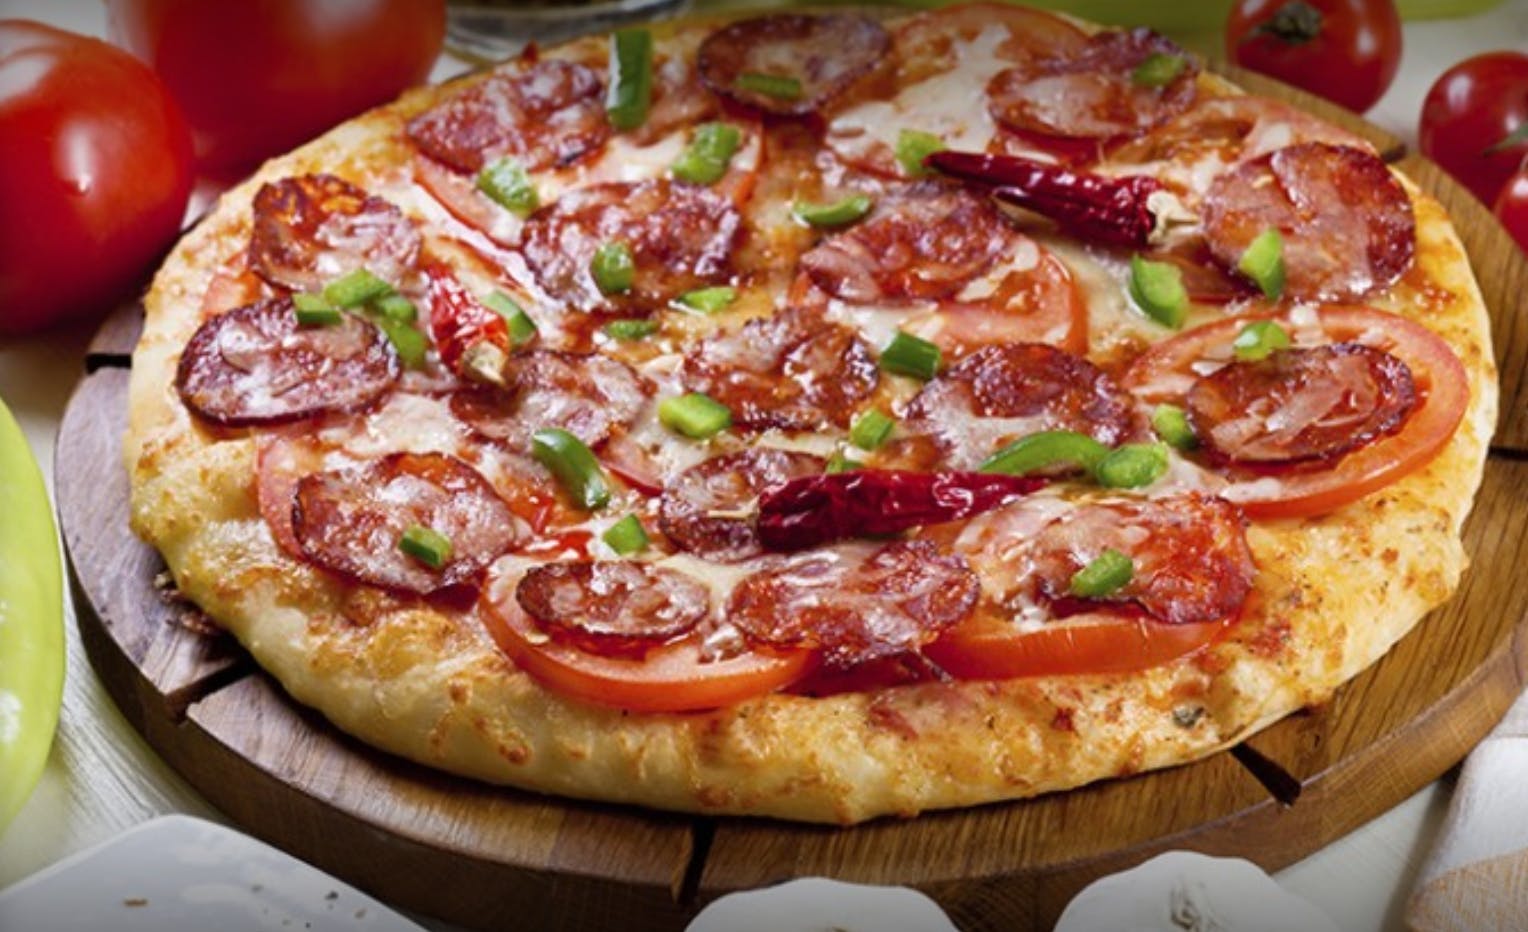 Pizza Business for Sale in Thornton Colorado makes $106,000!